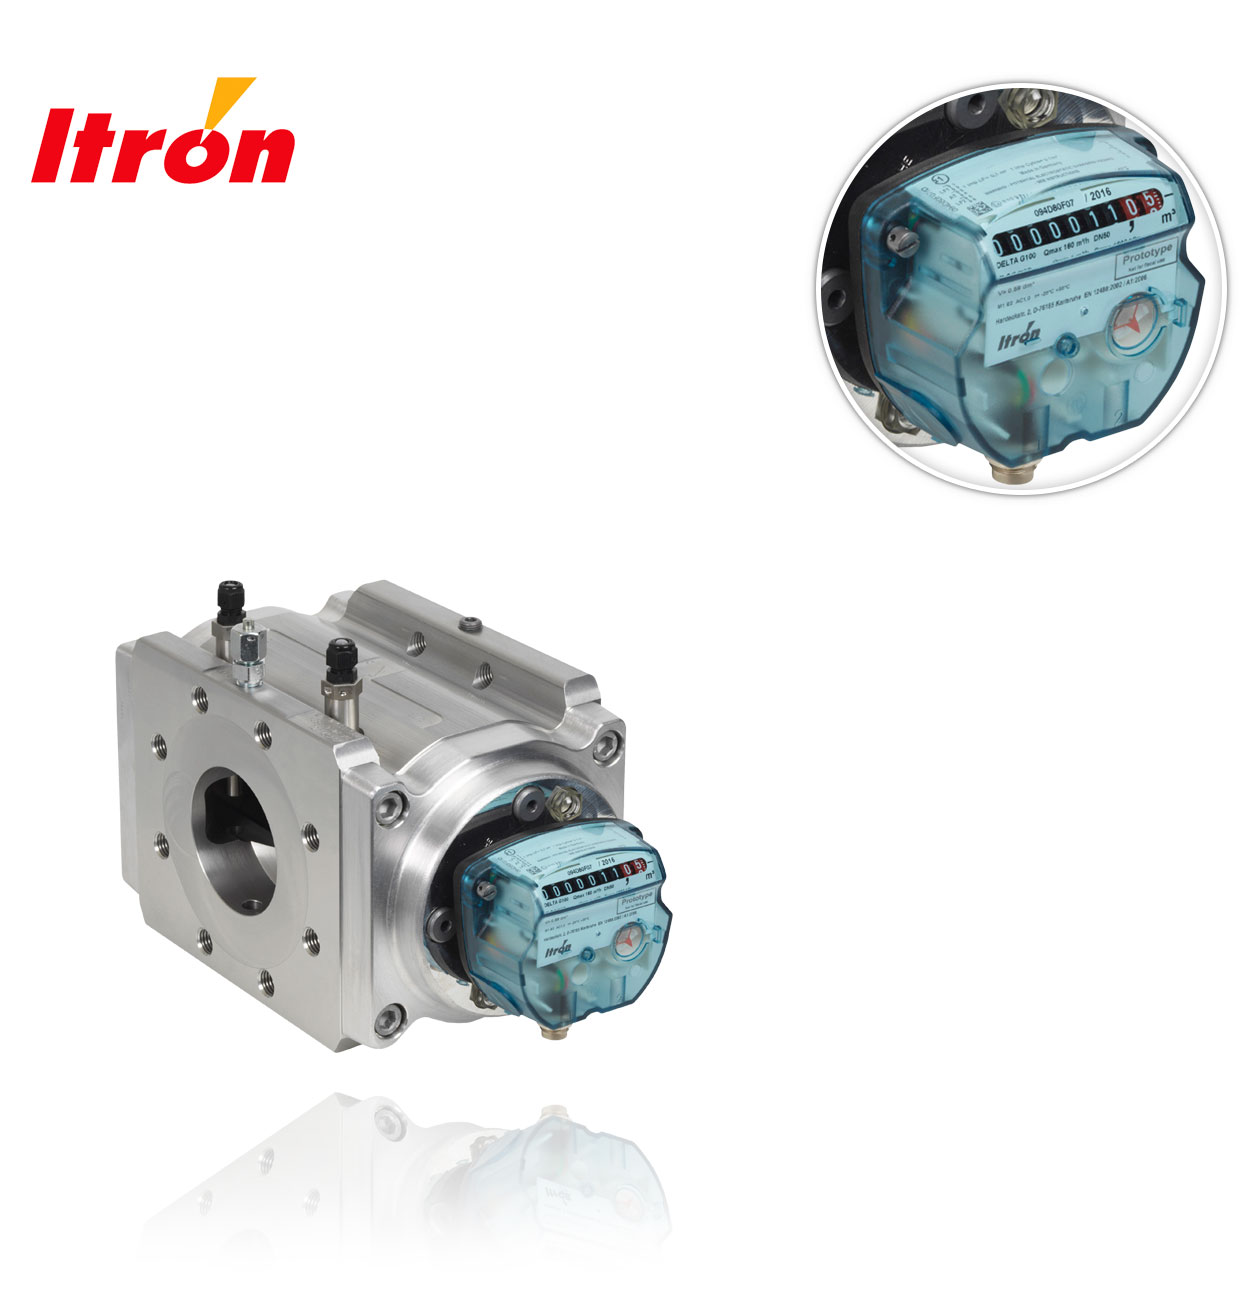 DELTA G25 DN50 maximum qty:40 DYNAMIC:100 LENGTH:171mm ITRON EXTENDED DYNAMIC ROTARY PISTON METER